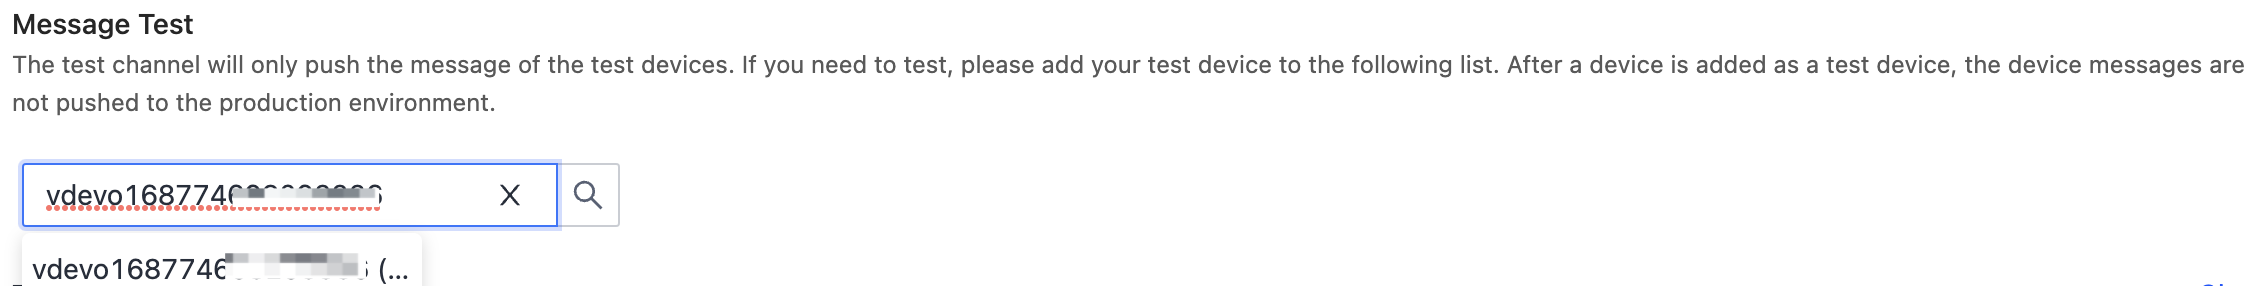 test_devices.png